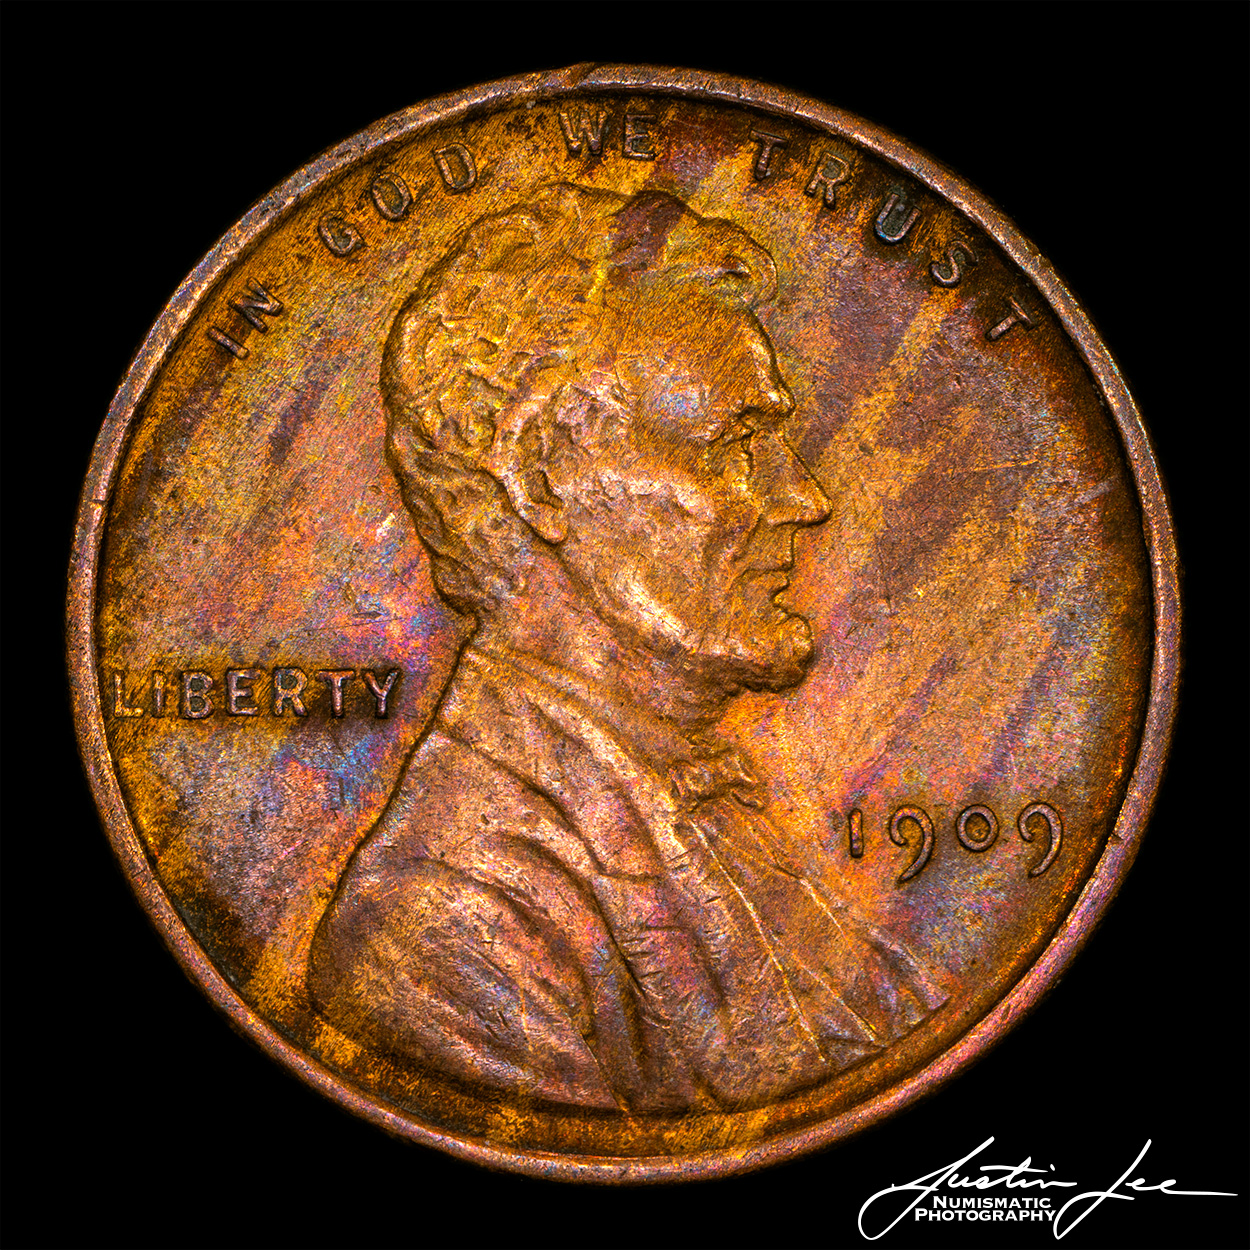 1909-Lincoln-Cent-woodie-Obverse.jpg